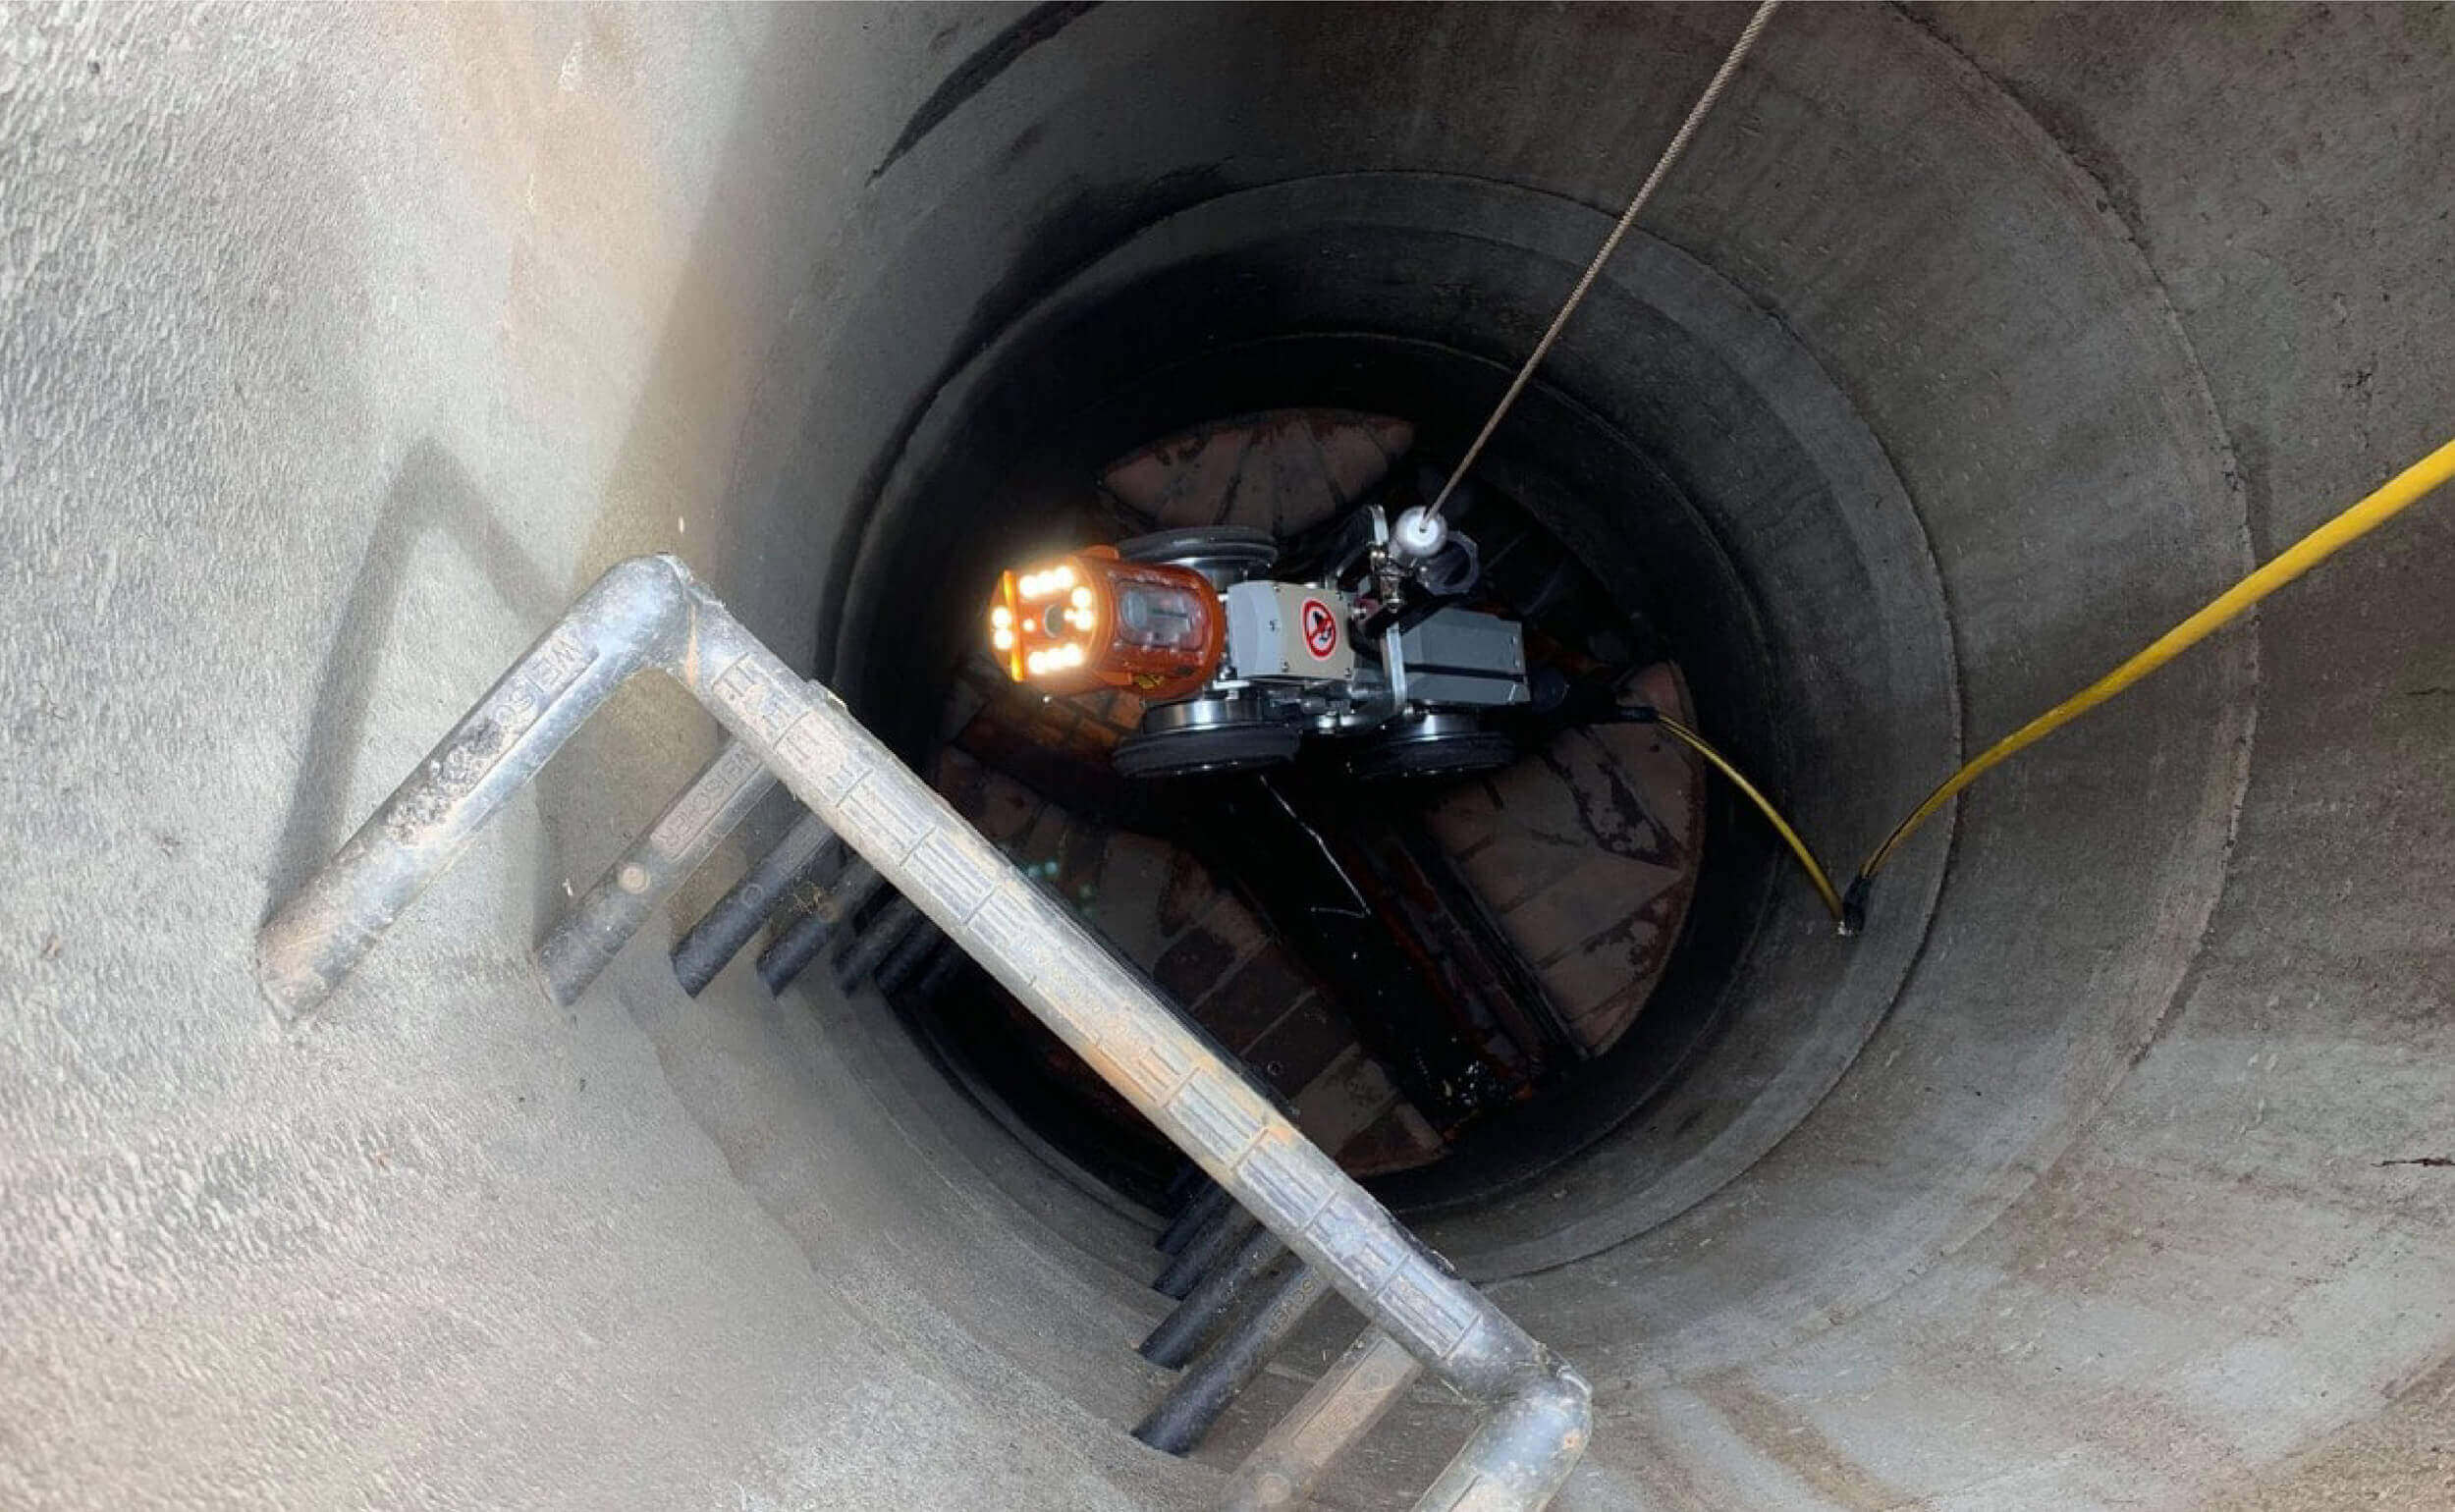 Pipe inspection robot being lowered into sewer